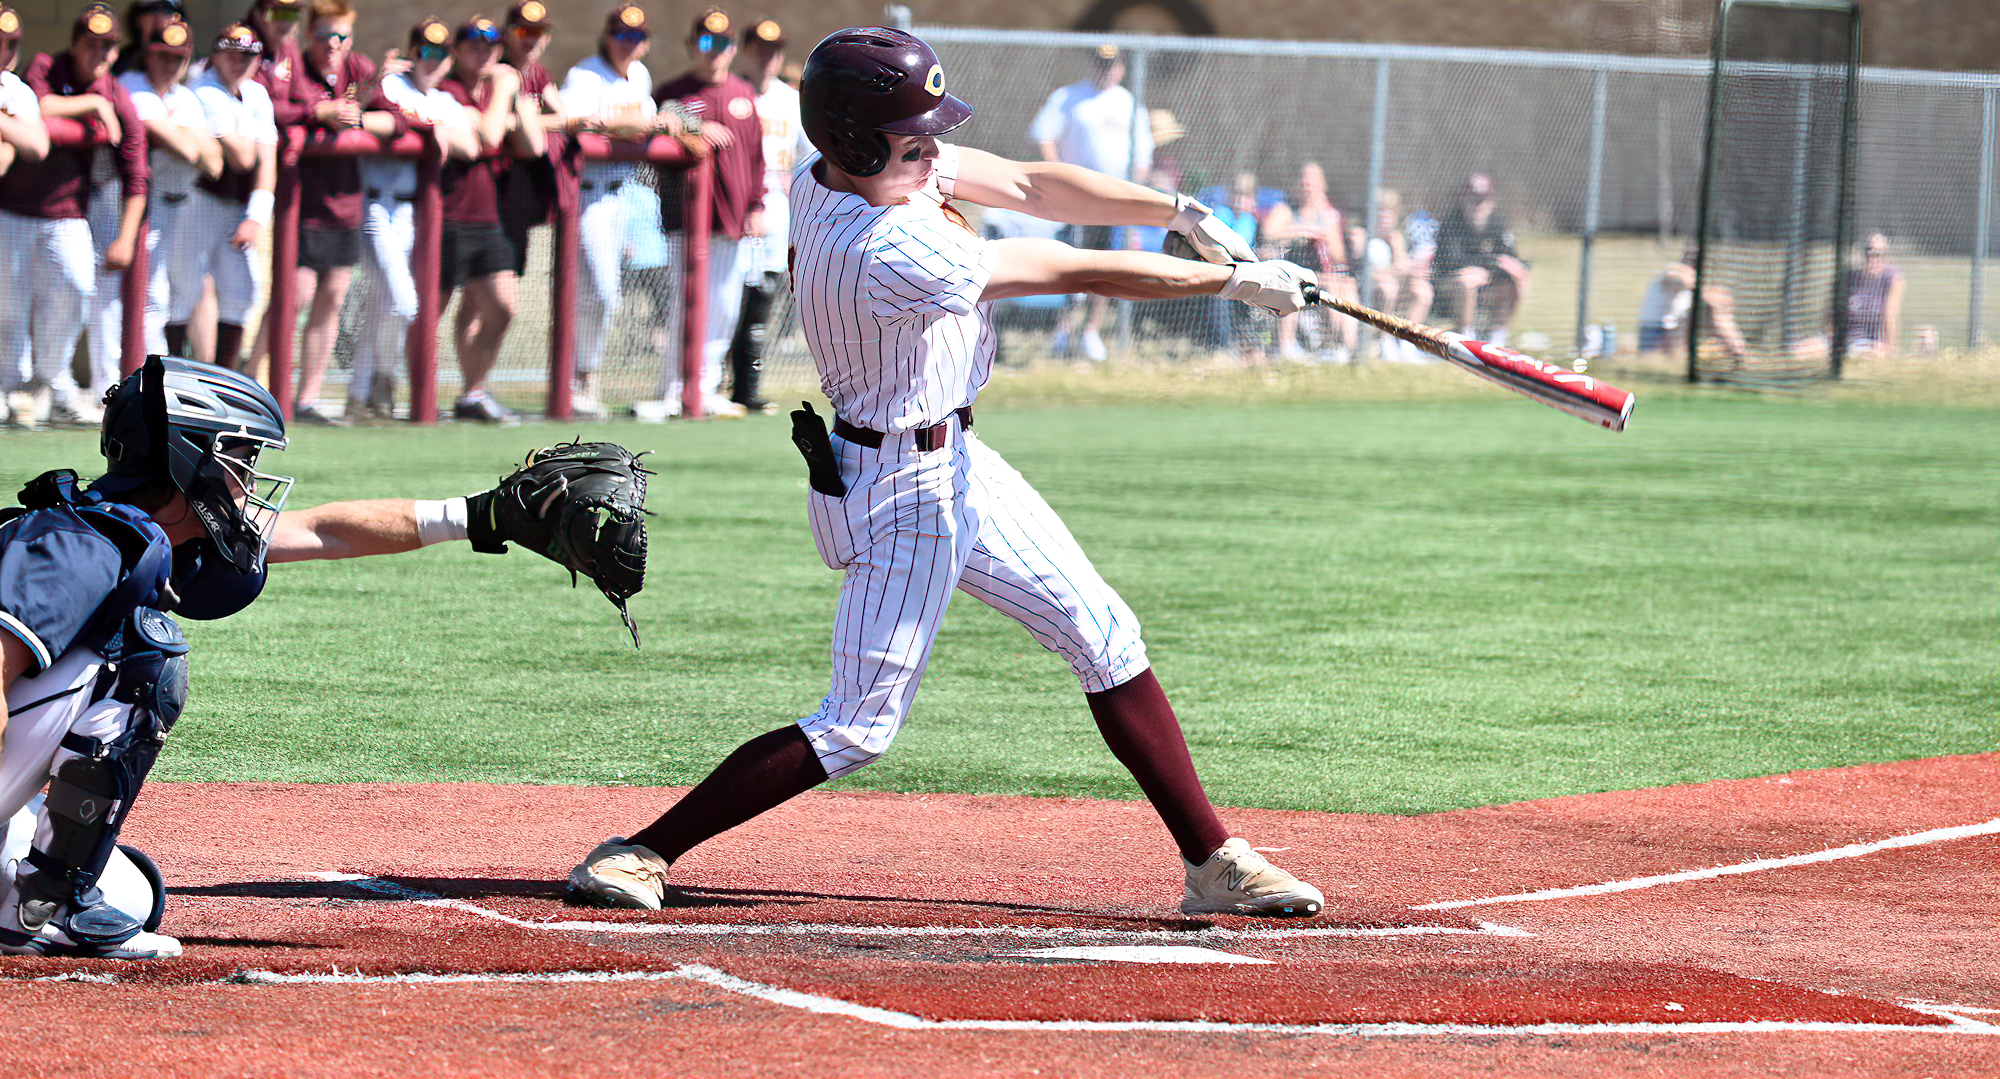 Caiden Kjelstrom hit his first collegiate home run in the Cobbers' doubleheader at Gustavus. He went 3-for-4 with four RBI in Game 1.